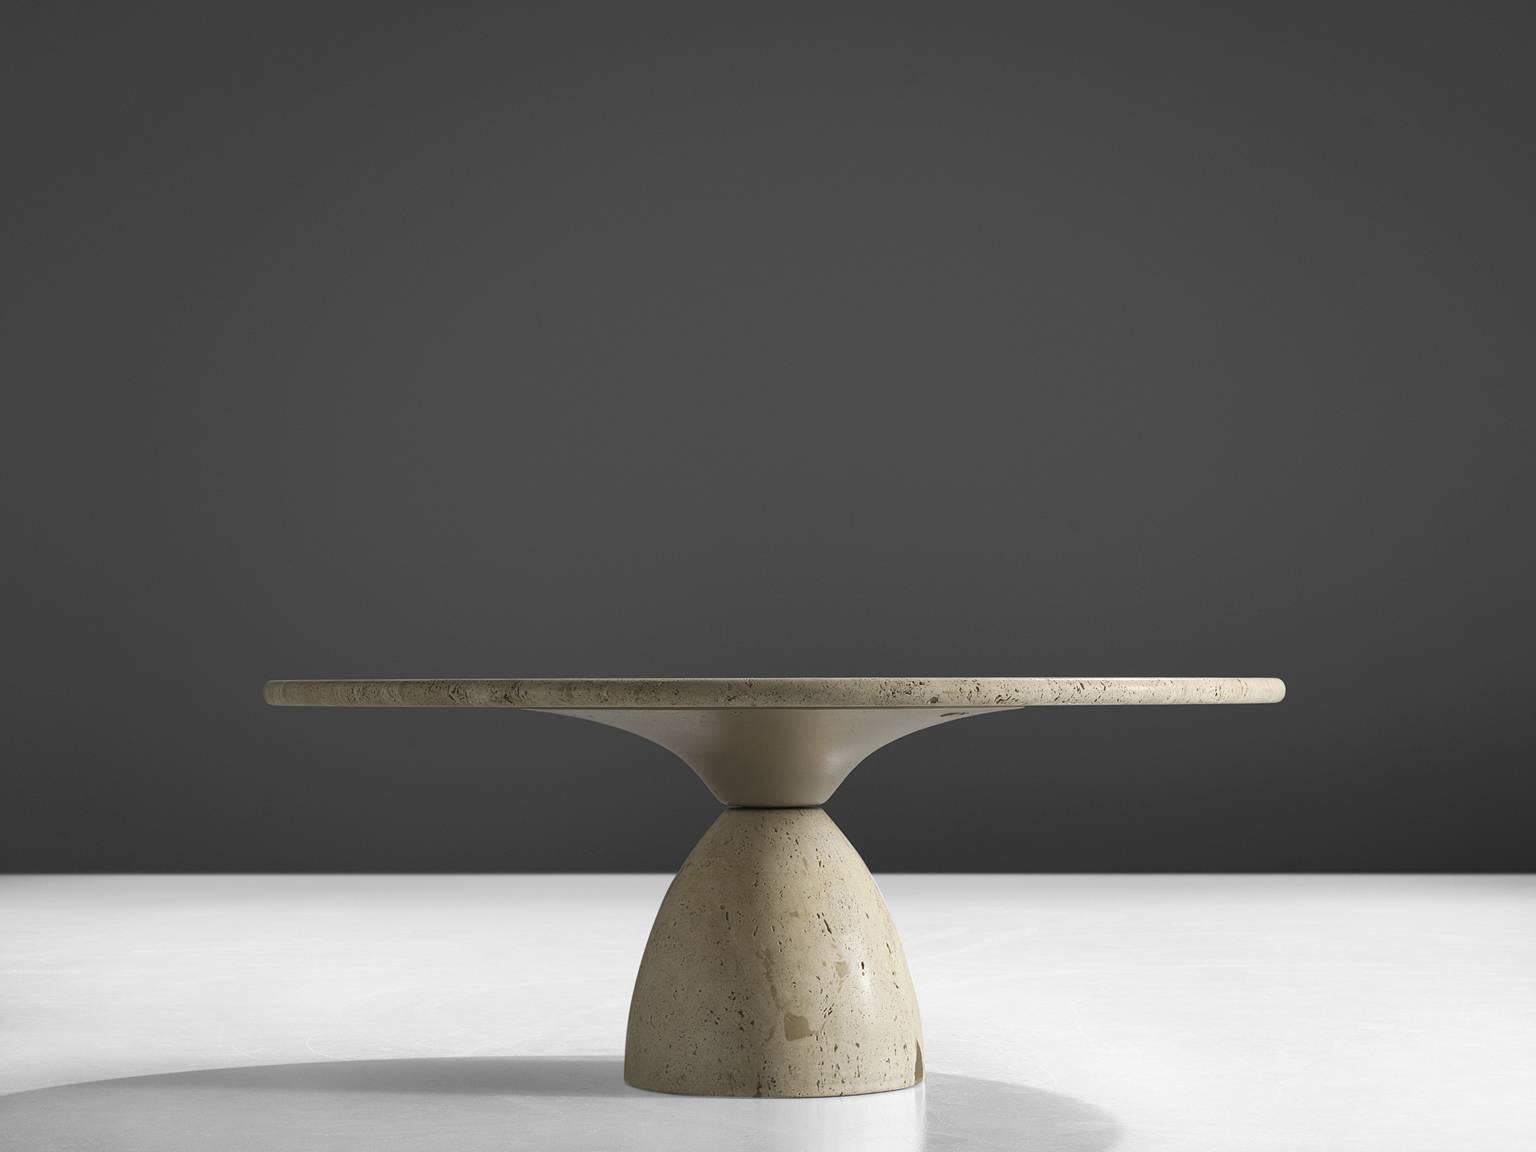 Cocktail table, travertine, Europe, 1970s

This strong cocktail table features a colon foot and a thick circular tabletop. The aesthetics are archetypical for postmodern design, bearing references to architectural forms and without a clean